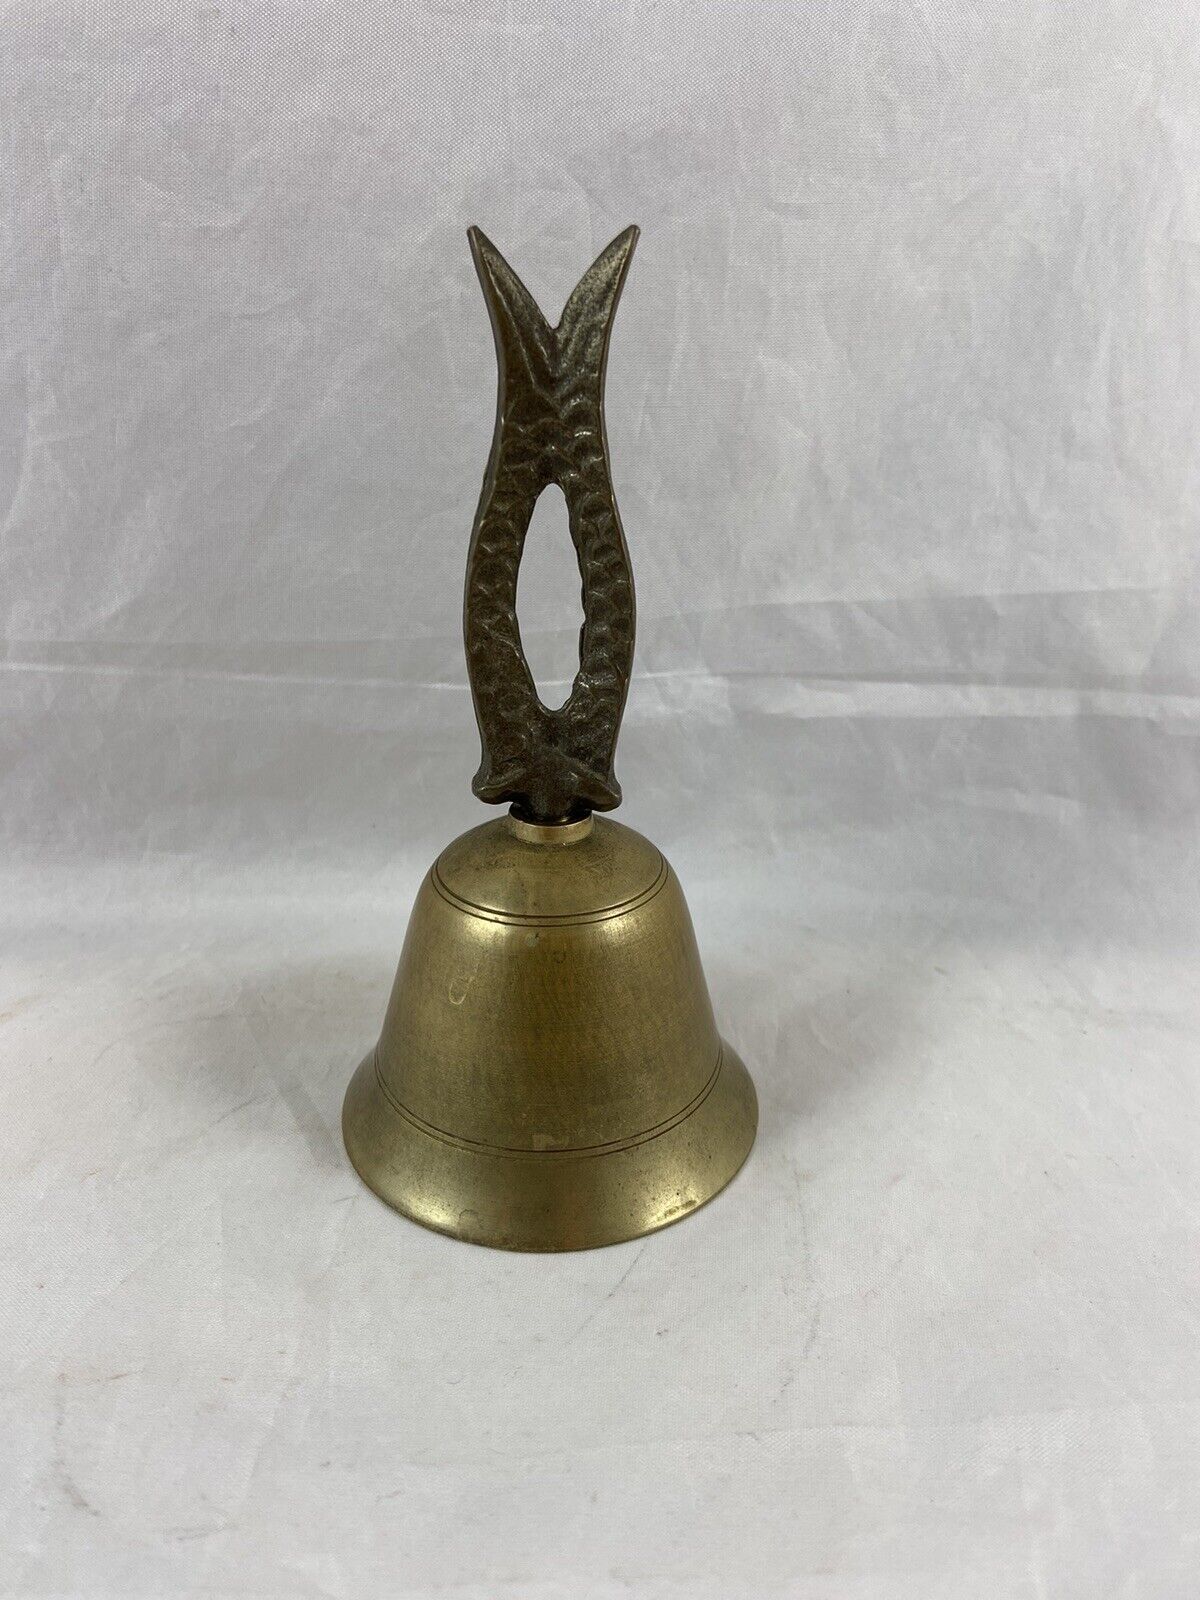 Brass Etched Fish Tail Handle Bell Lobeco Hand Crafted In Korea 5.25” Tall